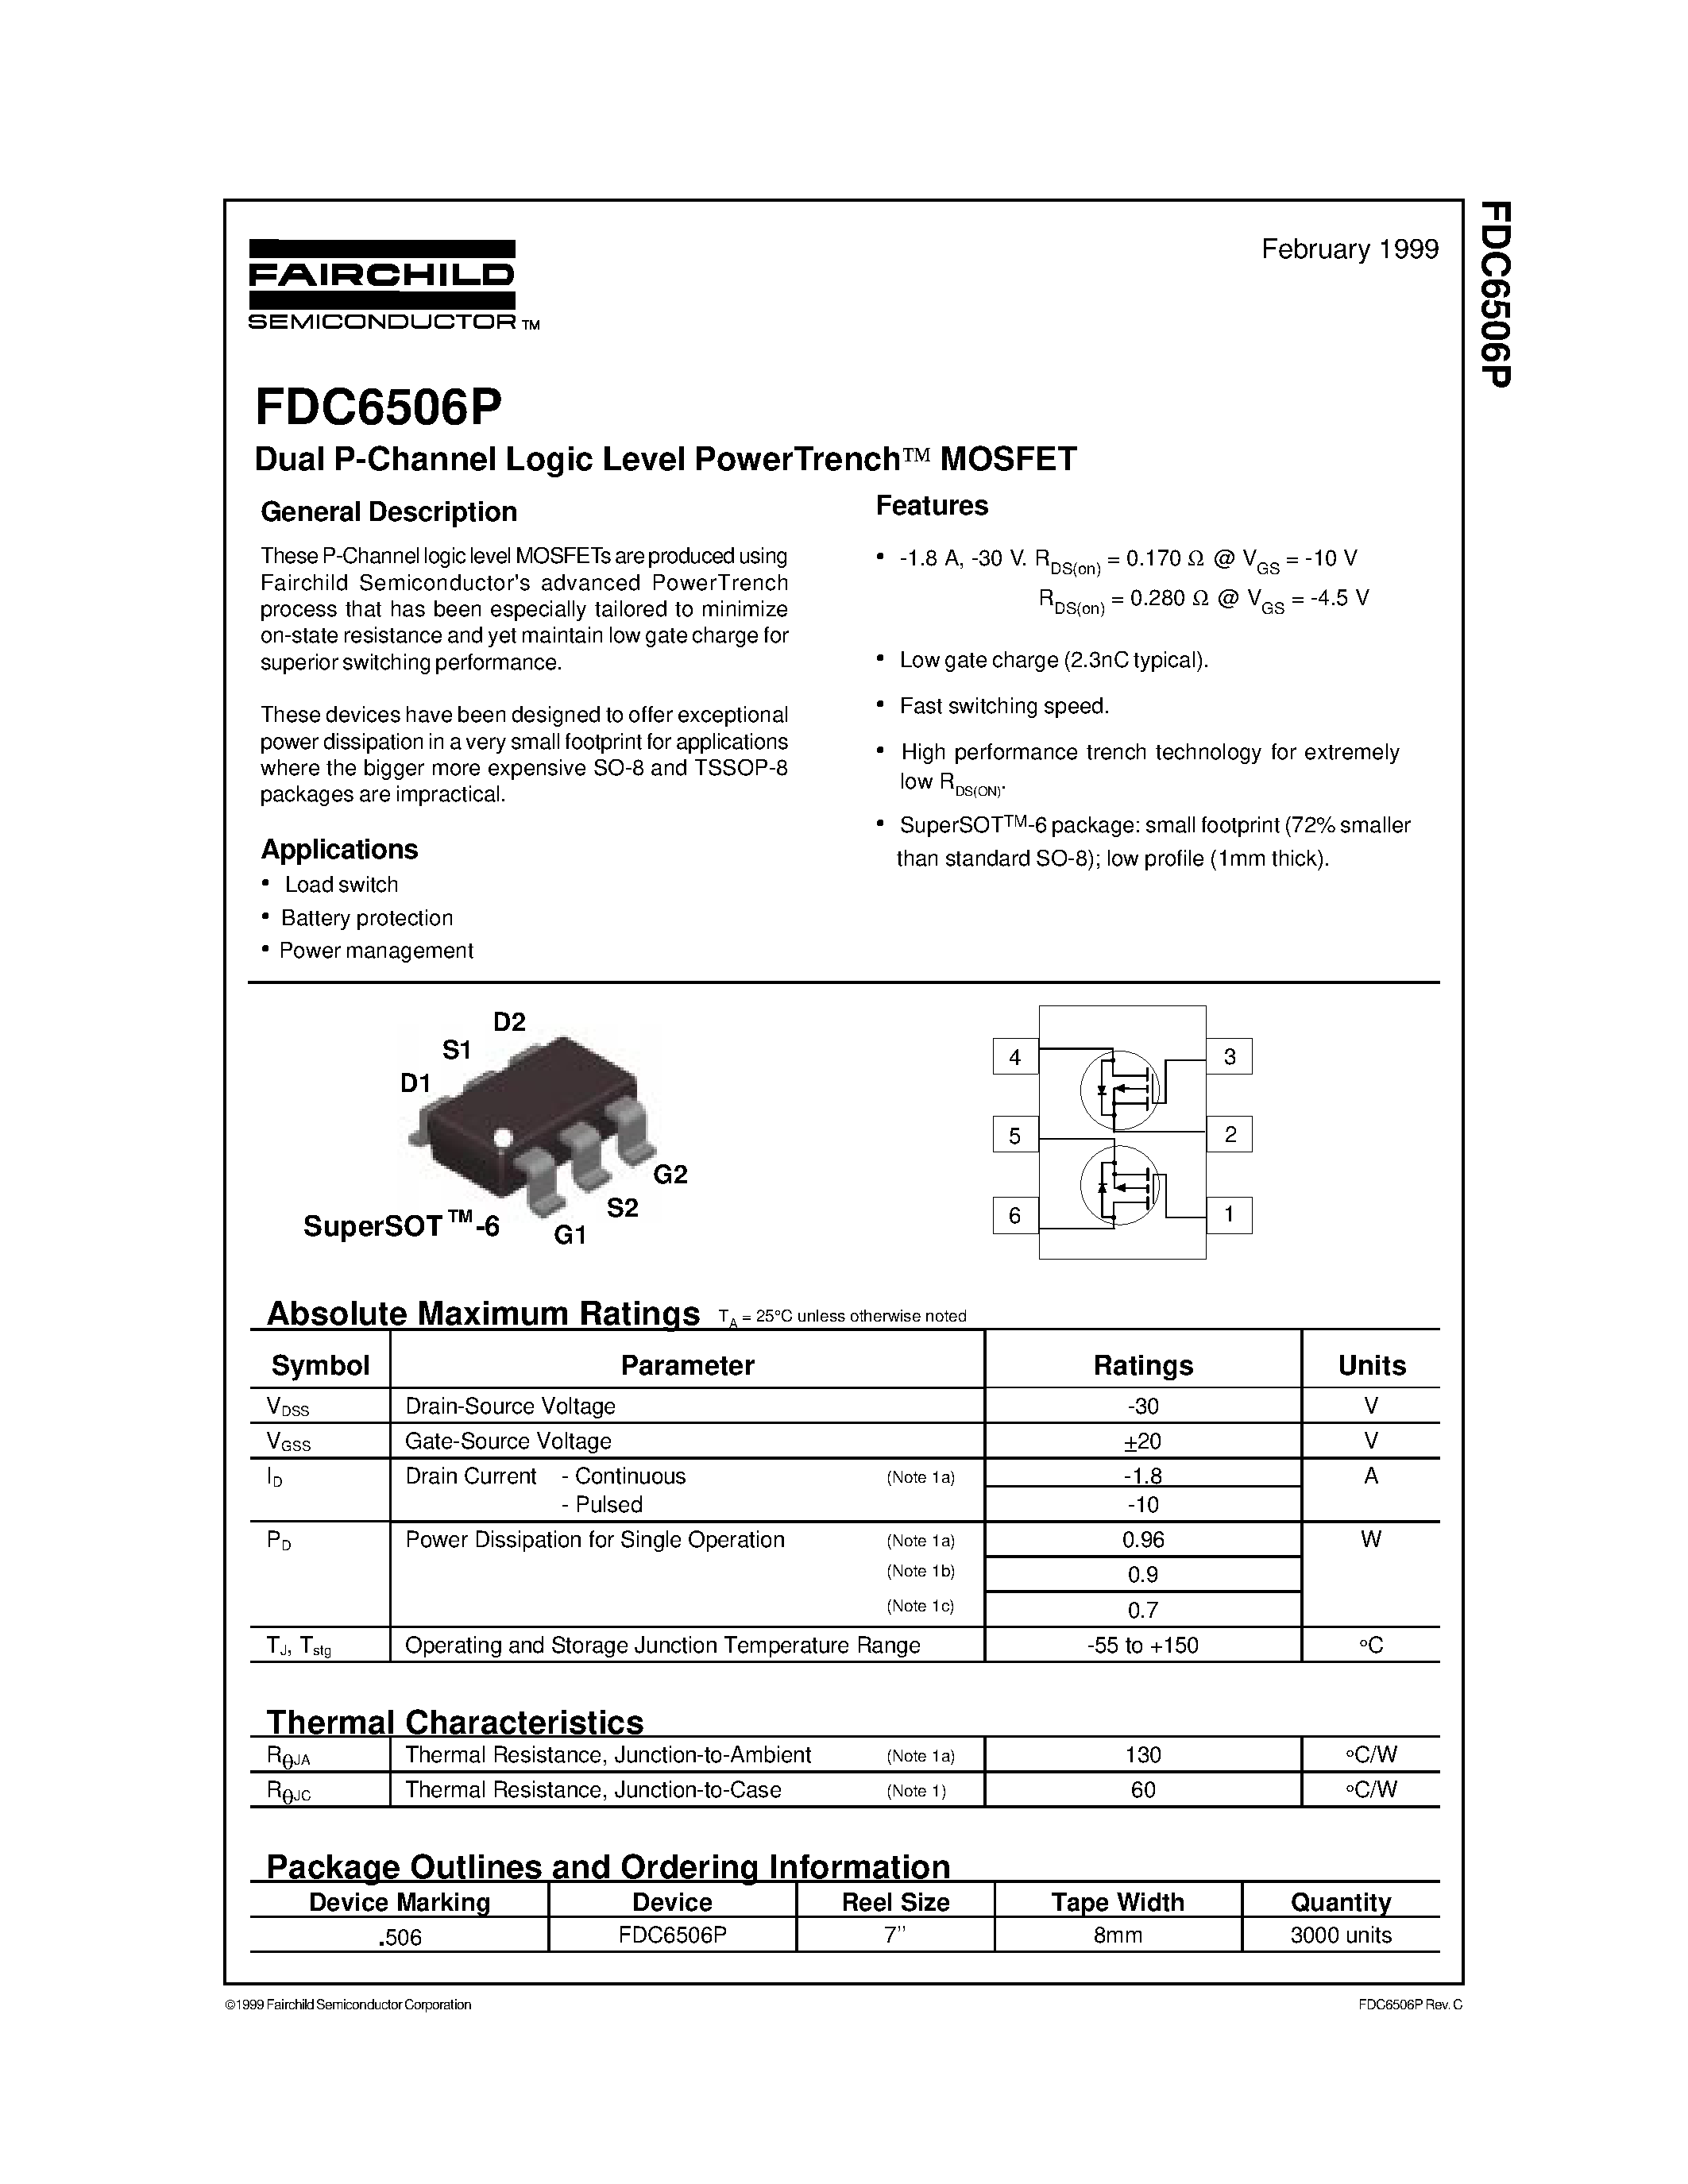 Даташит FDC6506P - Dual P-Channel Logic Level PowerTrench MOSFET страница 1